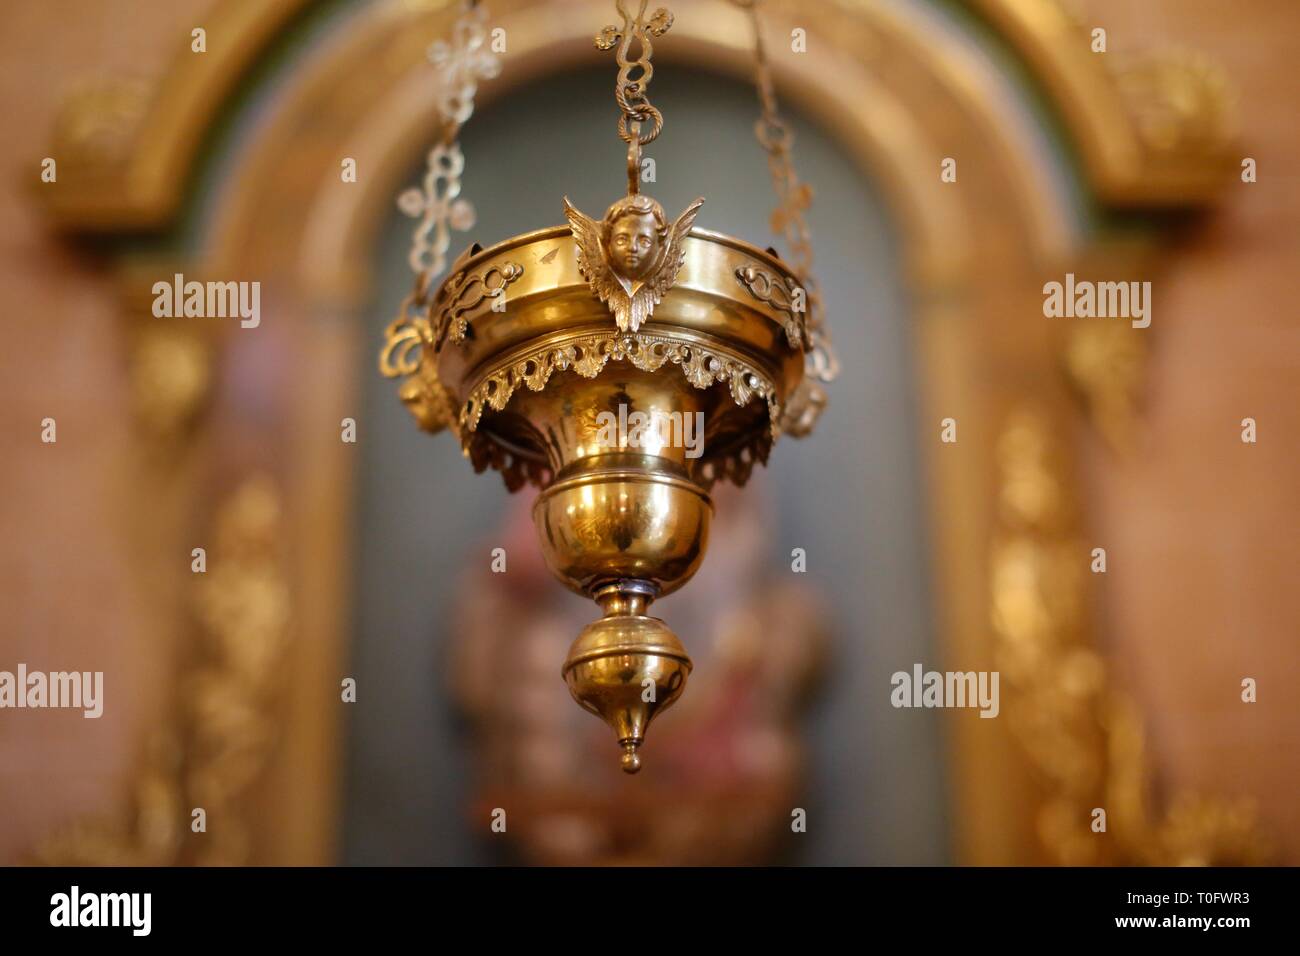 Thurible High Resolution Stock Photography and Images - Alamy